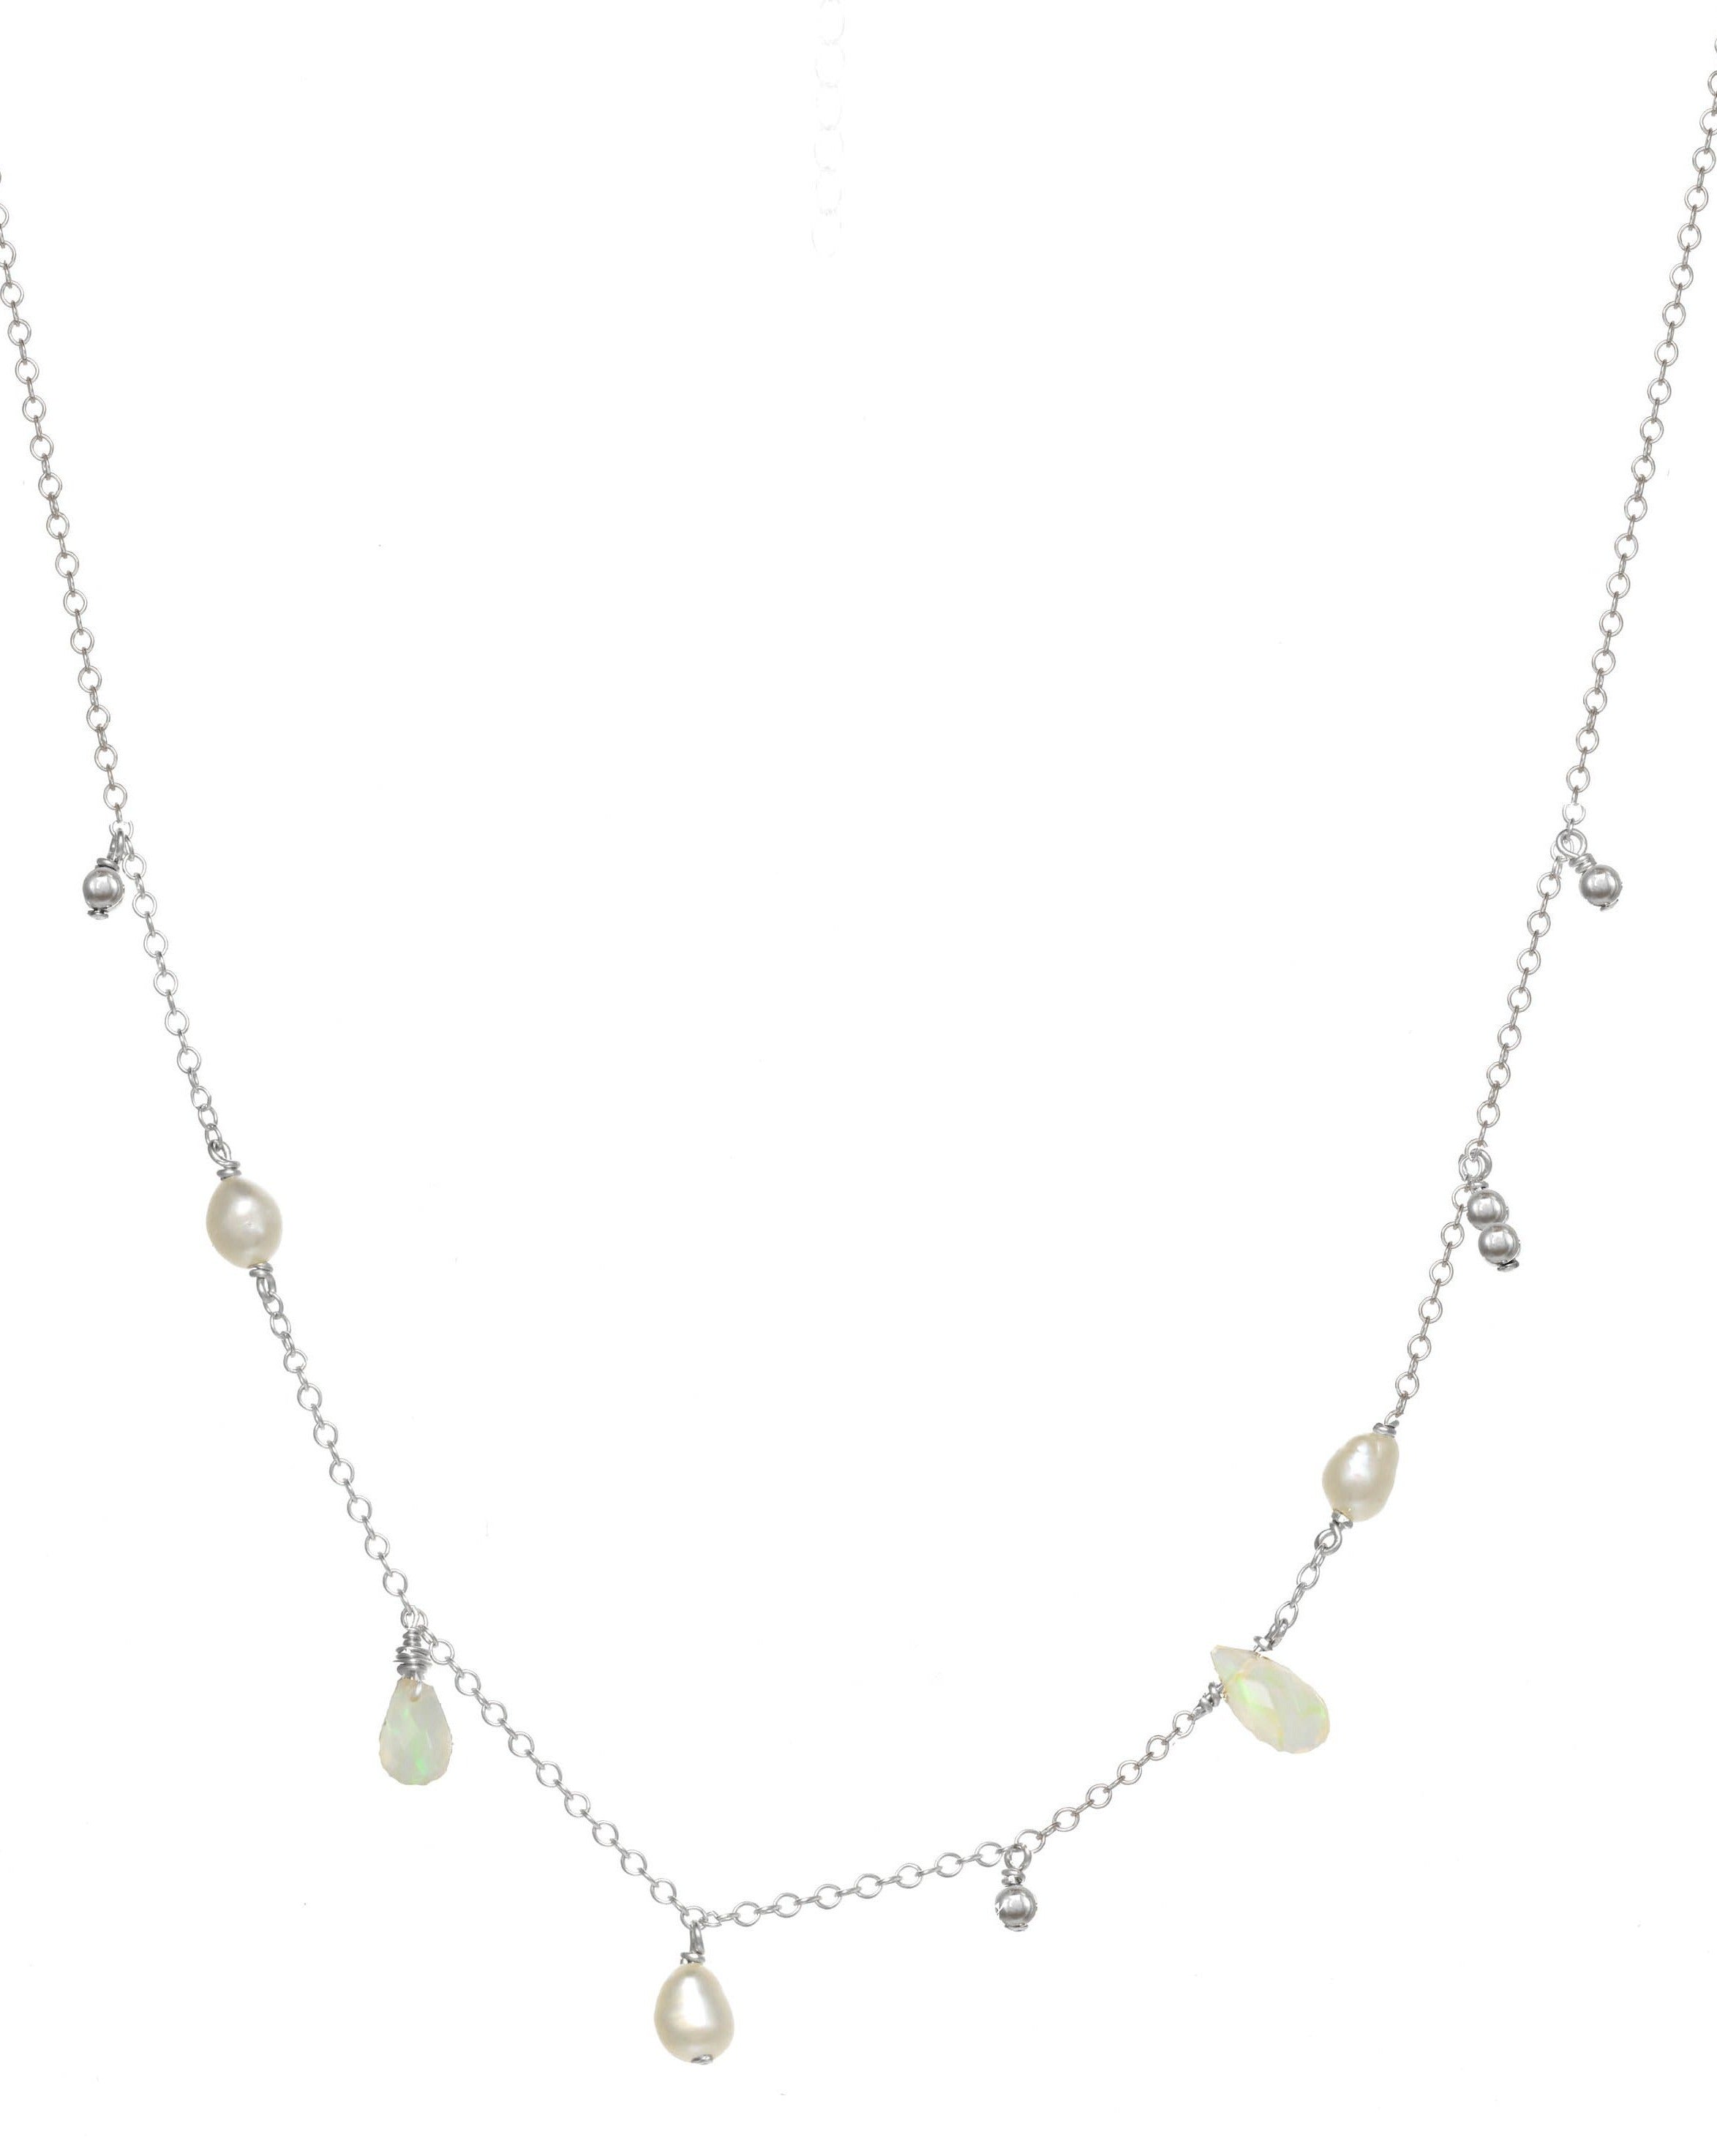 Genevieve Necklace by KOZAKH. A 16 to 18 inch adjustable length necklace in Sterling Silver, featuring 3-4mm white rice Pearls and 5-6mm faceted Ethiopian Opal droplets.